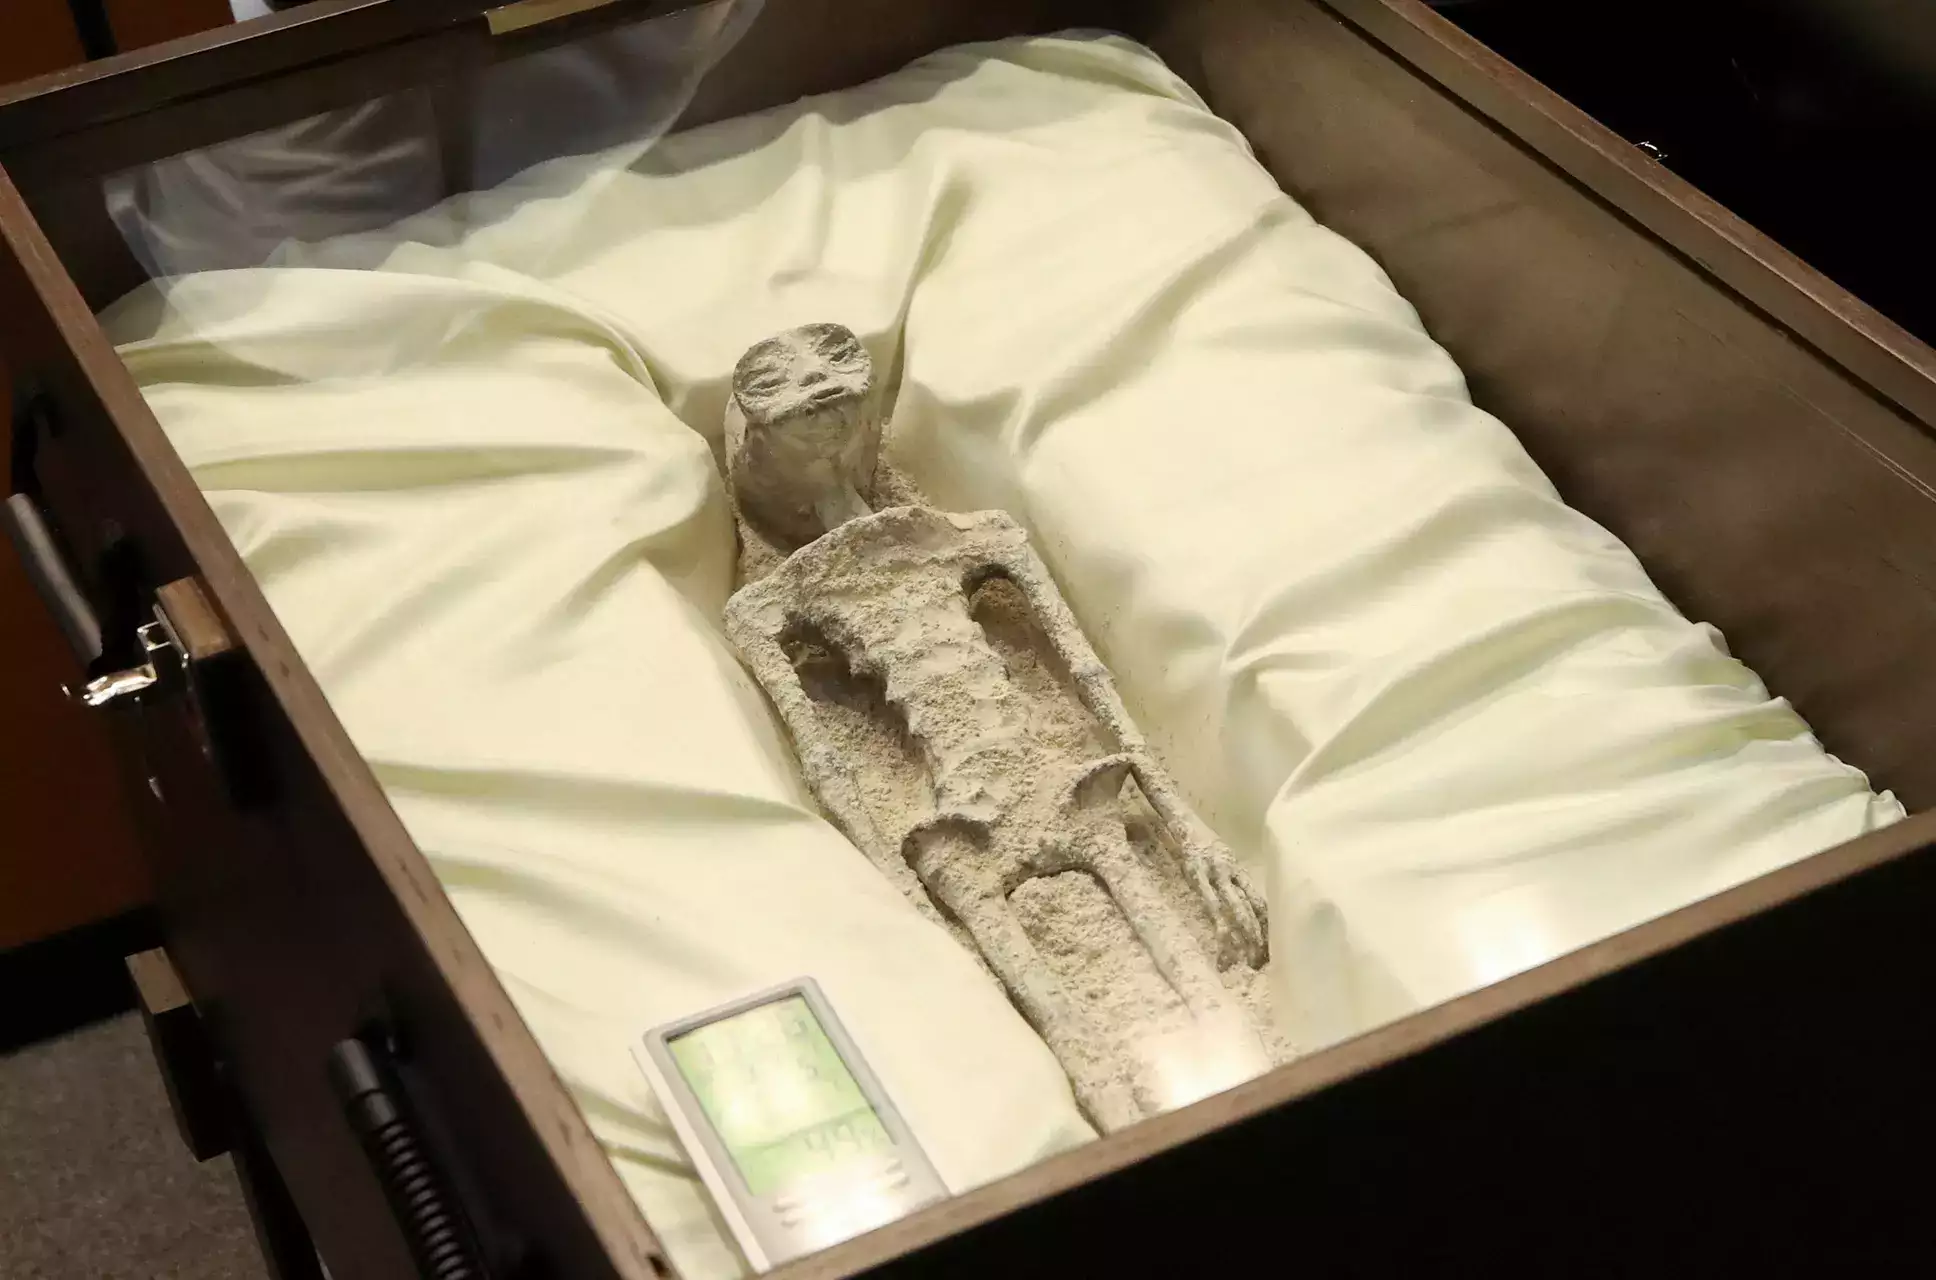 Update: “Alien Mummies” found last October in Peru are actually dolls crafted from human bones